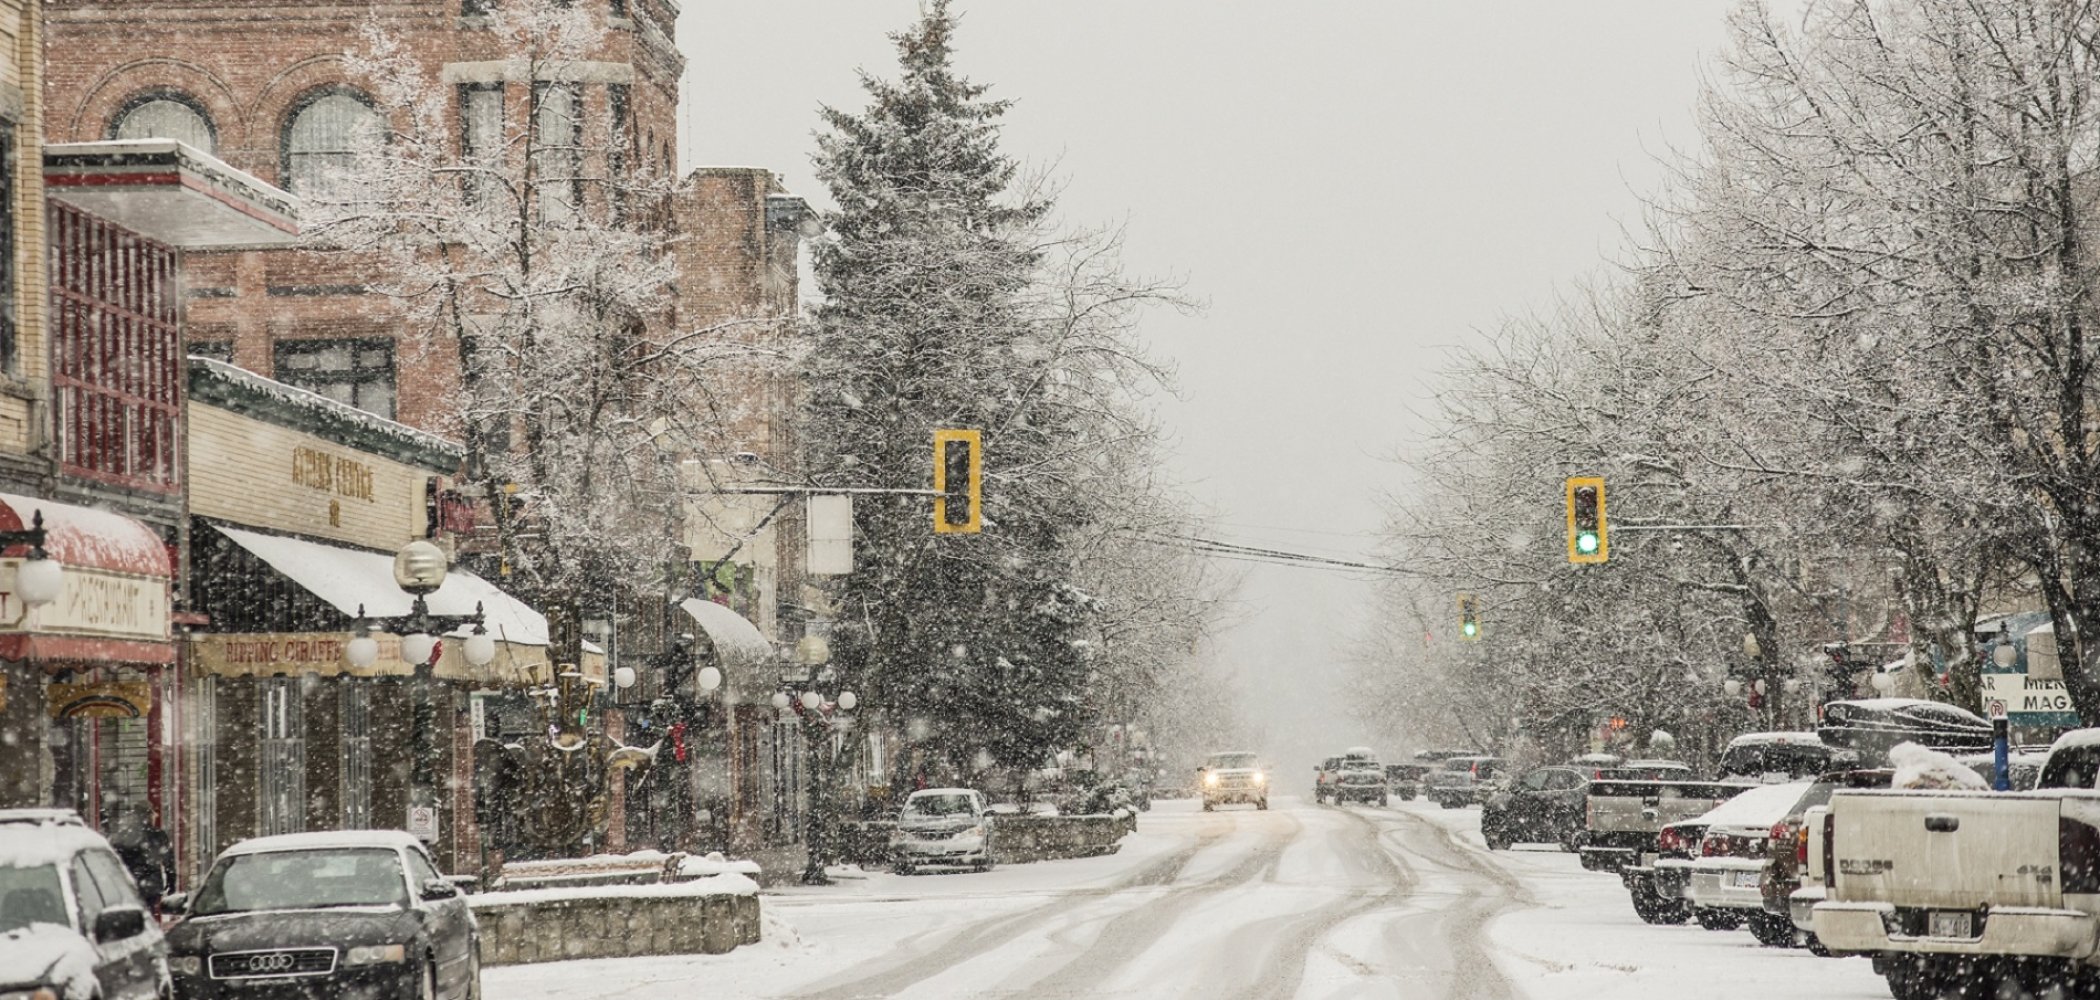 A snowy view of downtown Nelson. The snow covered street has cars on both sides. Shops line the streets.